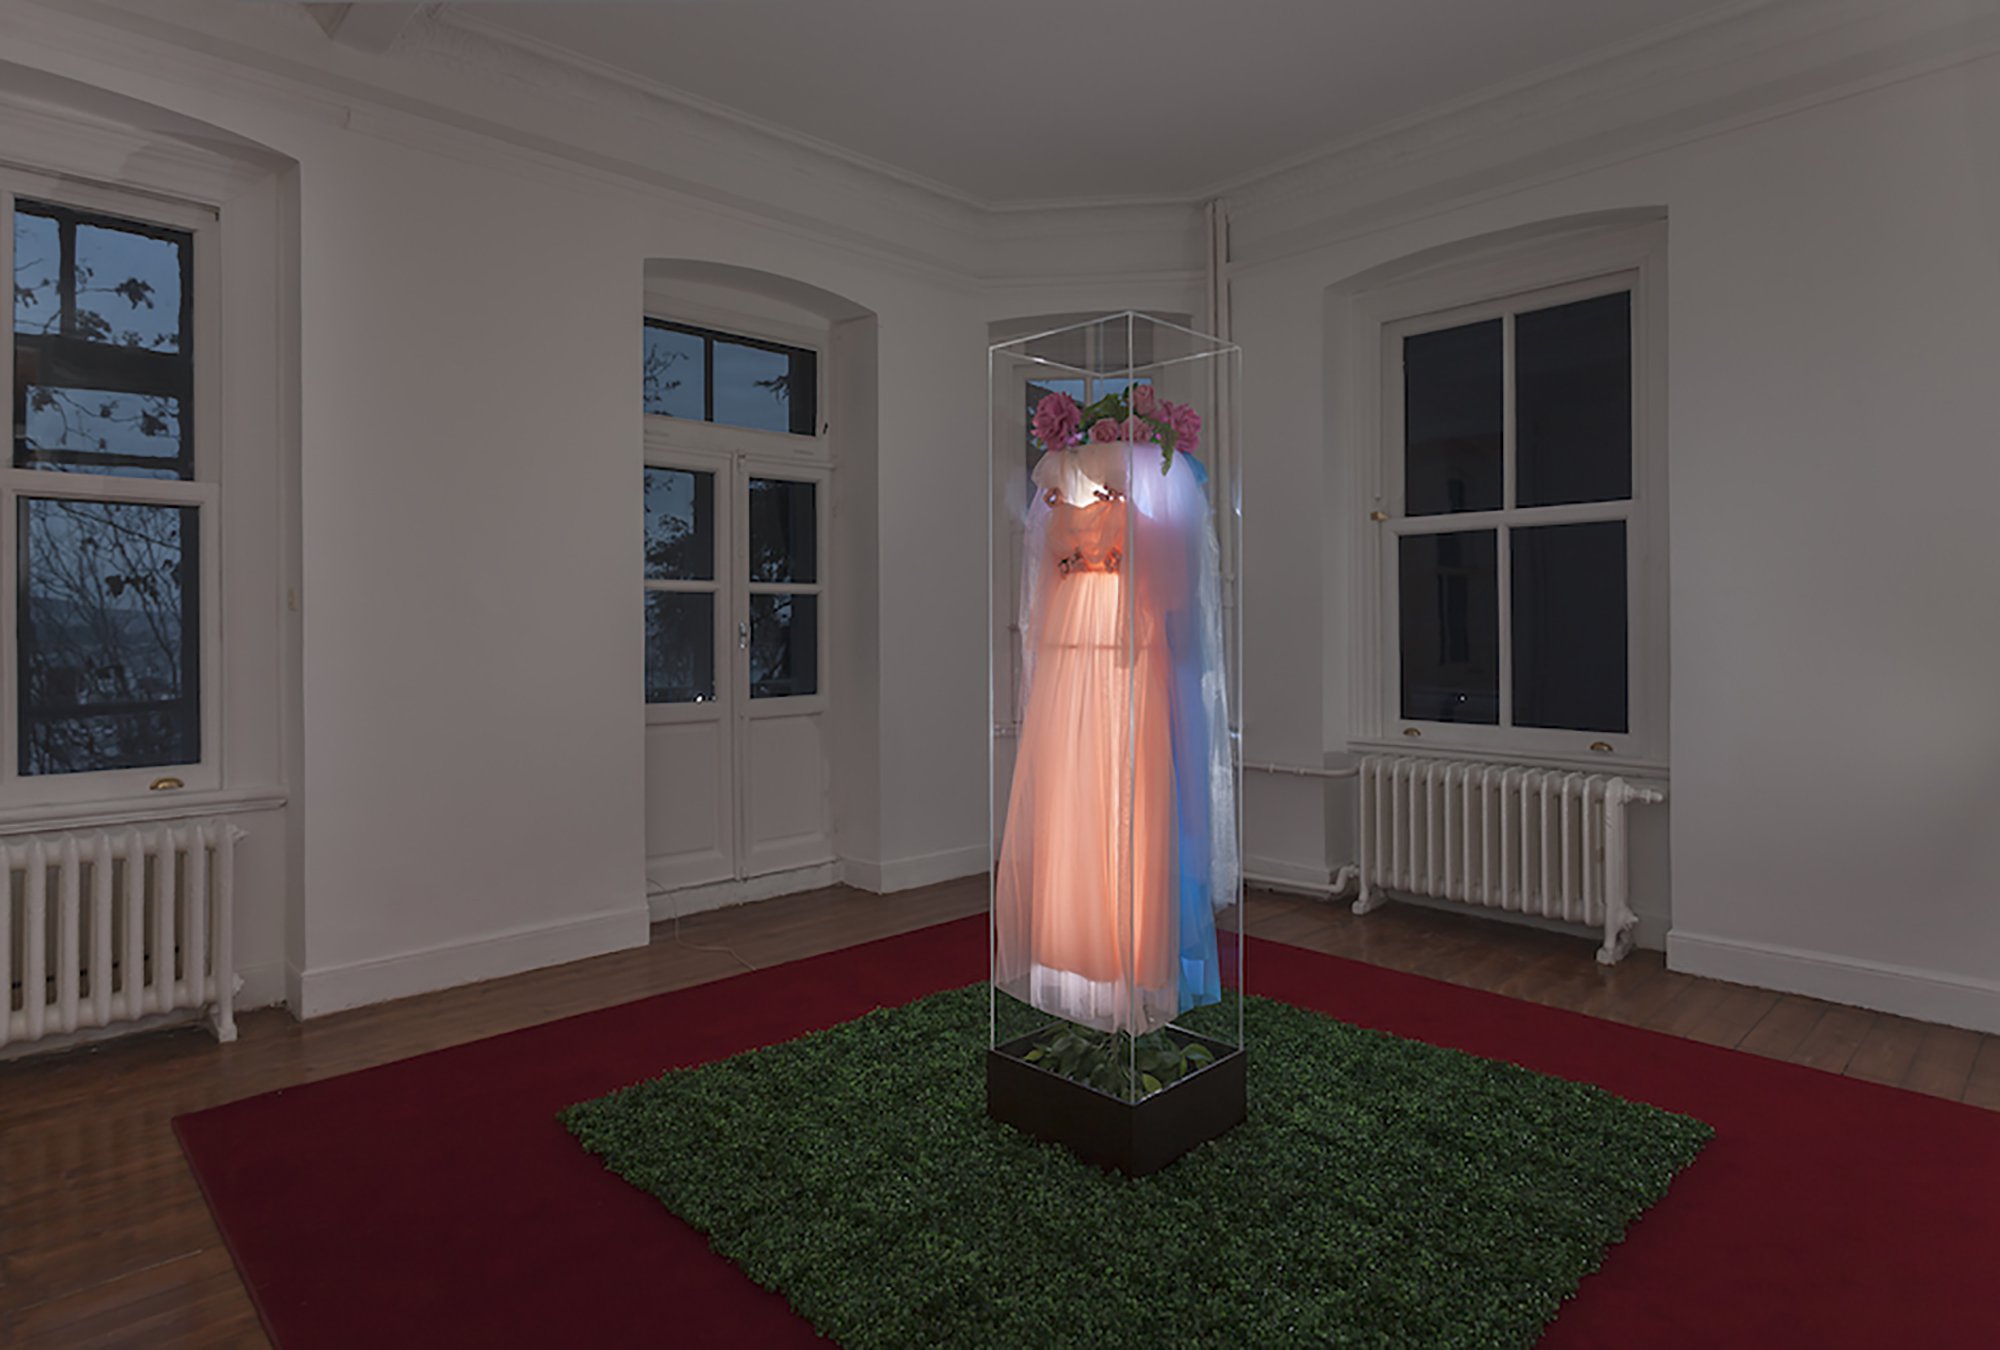 Gülsün Karamustafa, The Monument of Kitsch 2, found tulle dresses, plastic flowers and plants, iron structure, fluorescent lights, wooden base, plexiglass, dimensions variable, 1988-2013. Installation view, Talisman, Rodeo, Istanbul, 2013